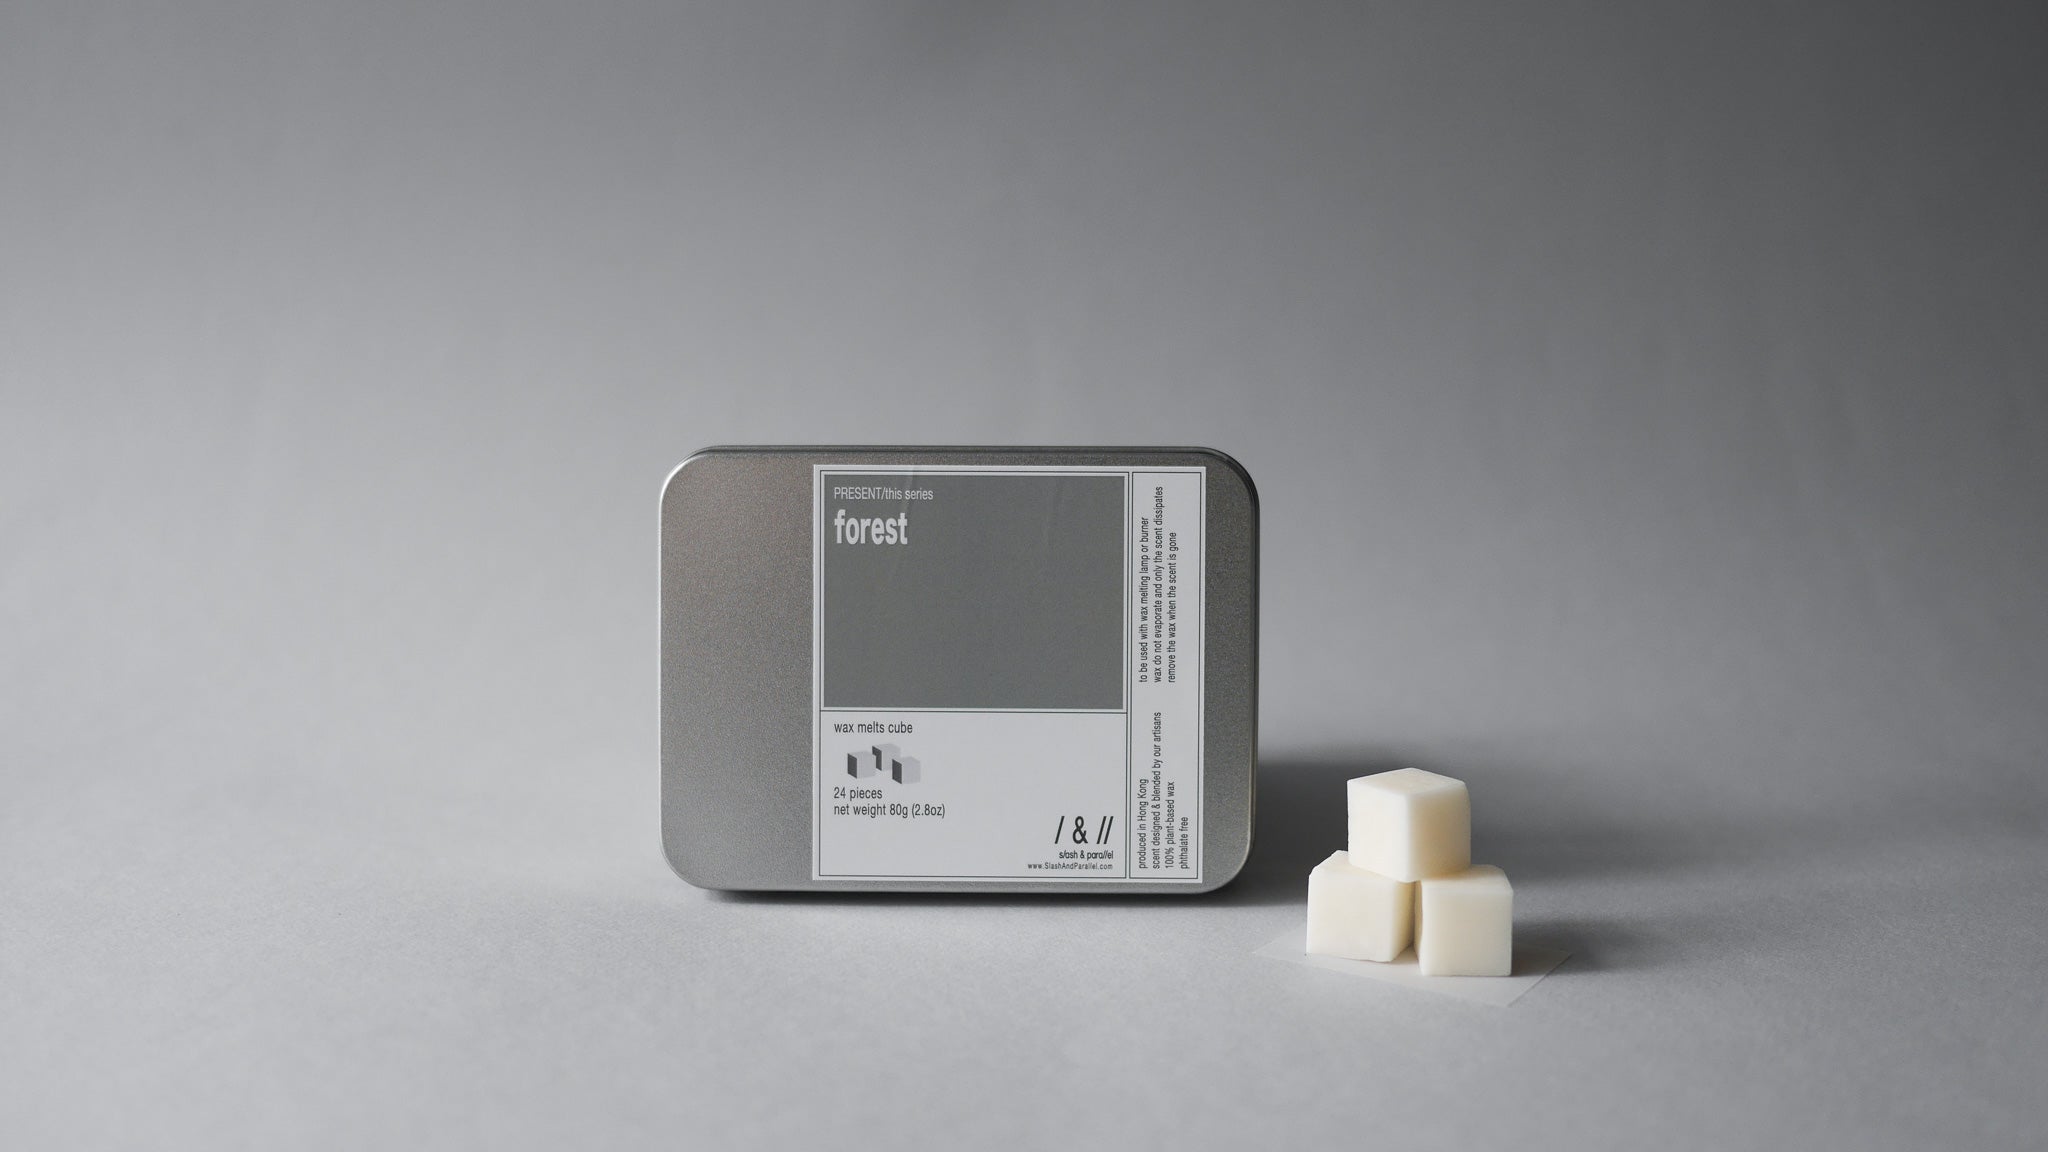 forest / wax melts 80g // this series